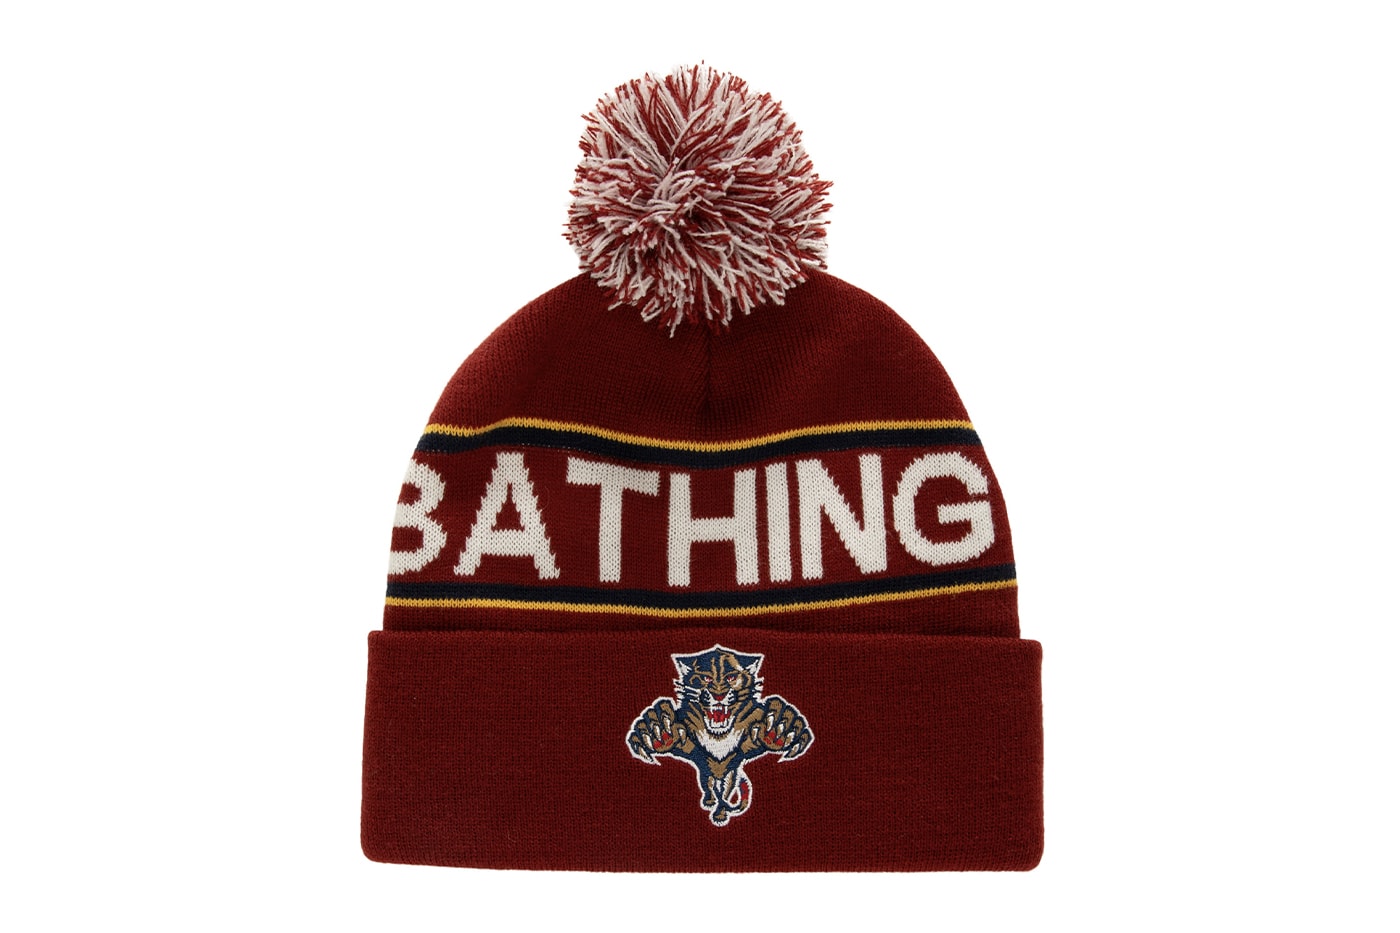 BAPE Teams up With Mitchell & Ness For New NHL Collaboration jersey beanies national hockey league Anaheim Ducks, New York Rangers, Los Angeles Kings, and Florida Panthers